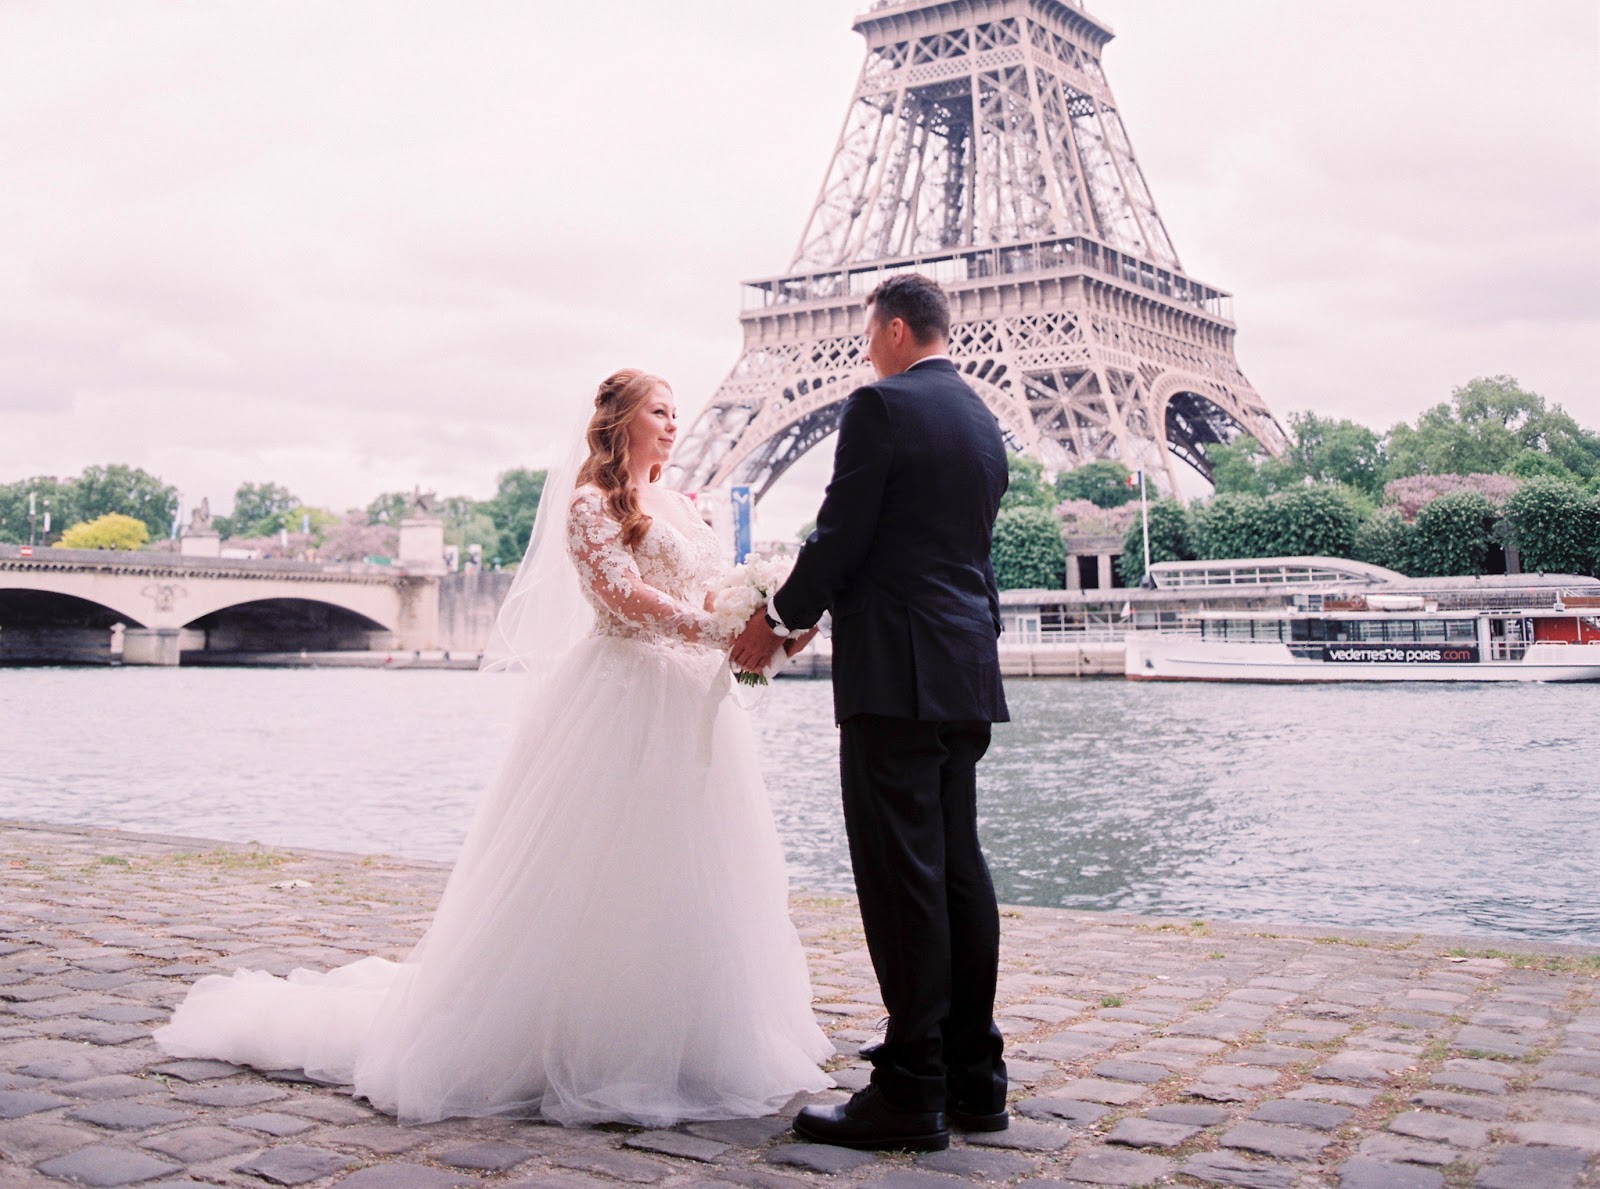 <u>Query</u>: Two people getting married in front of a tower in Paris<br>
      <u>Named Entity</u>: Eiffel Tower